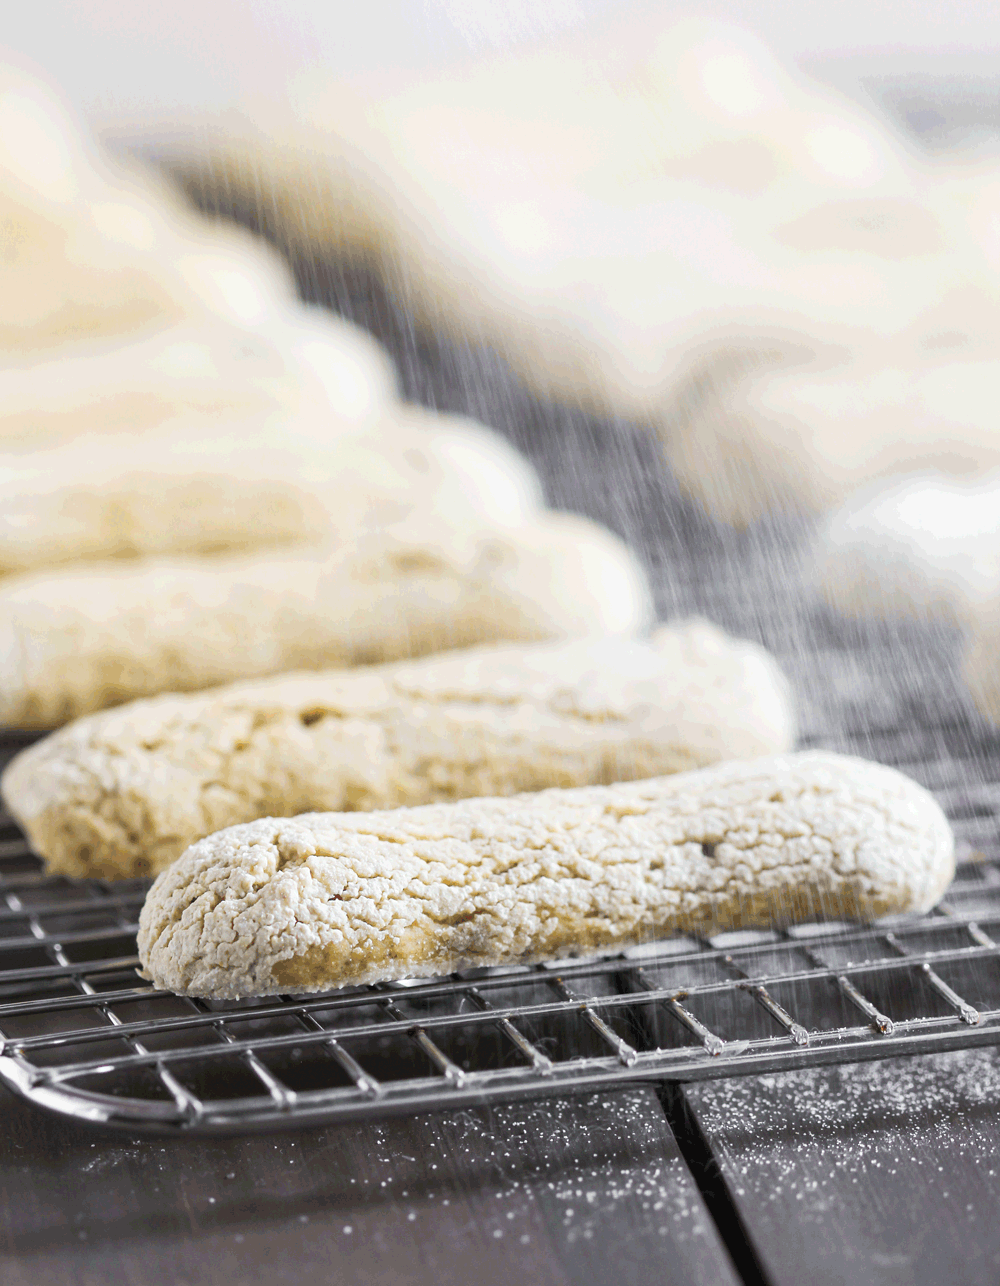 Did you know you can make Ladyfingers AT HOME?! Oh yes! These Healthy Homemade Ladyfingers are soft, sweet, and full of flavor. Perfect in Tiramisu or completely on their own. You'd never know they’re sugar free, low fat, low calorie, gluten free, AND vegan! Healthy Dessert Recipes with low carb, high protein, dairy free, and raw options at the Desserts With Benefits Blog (www.DessertsWithBenefits.com)